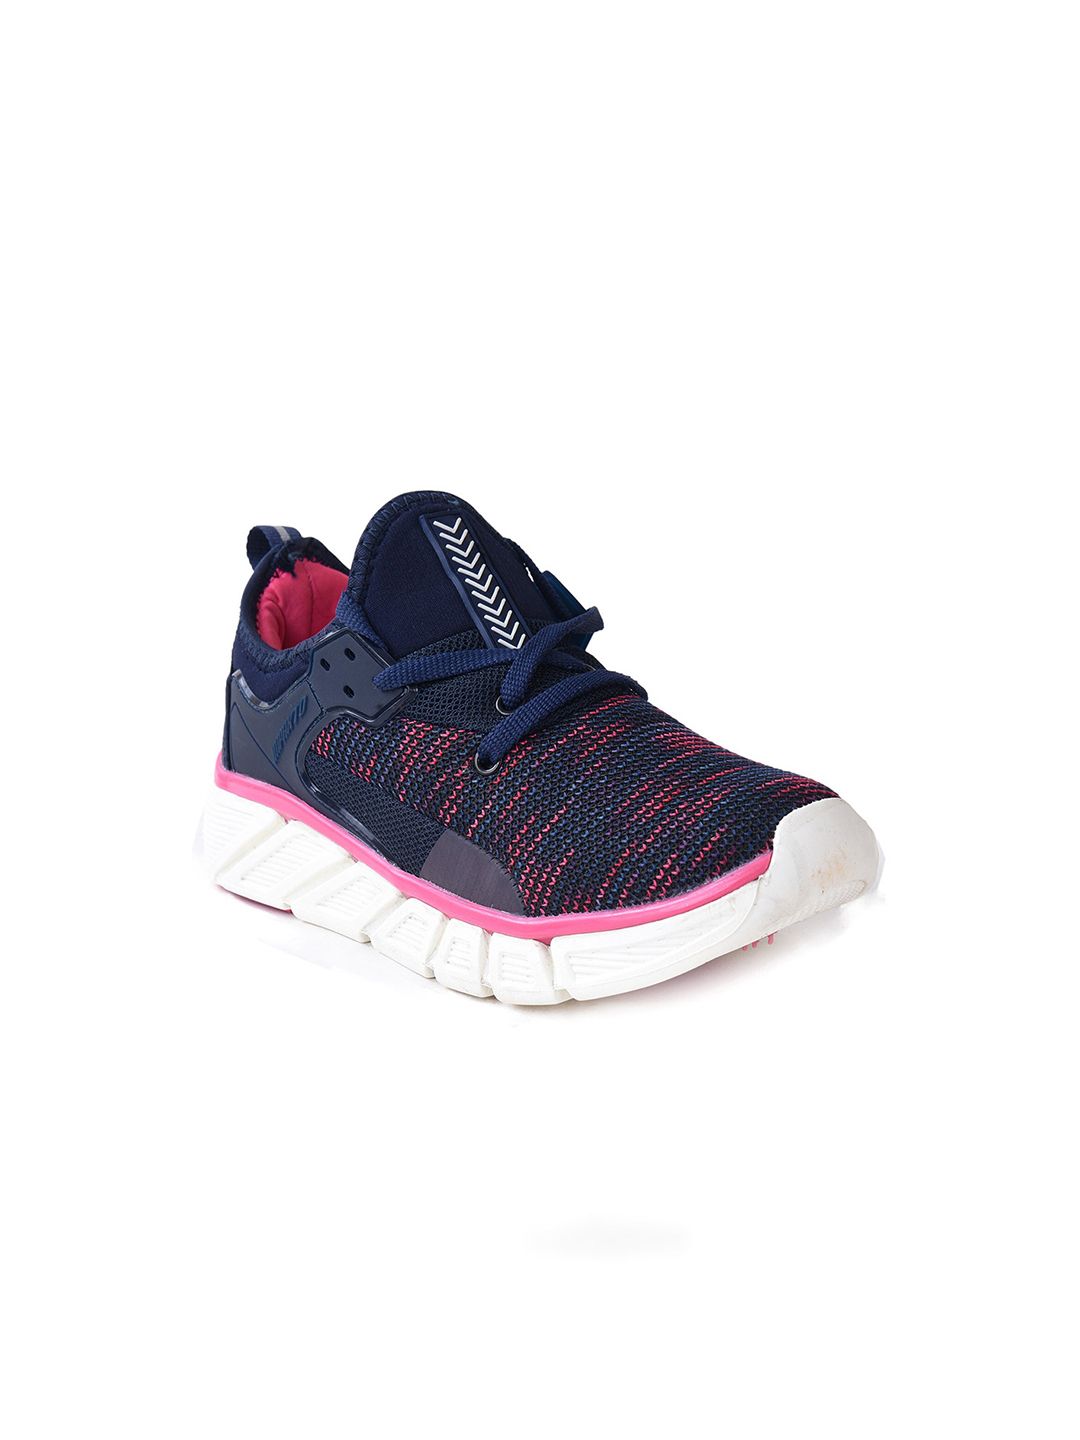 IMPAKTO Women Navy Blue Lace Up Mid-Top Mesh Running Non-Marking Sports Shoes Price in India